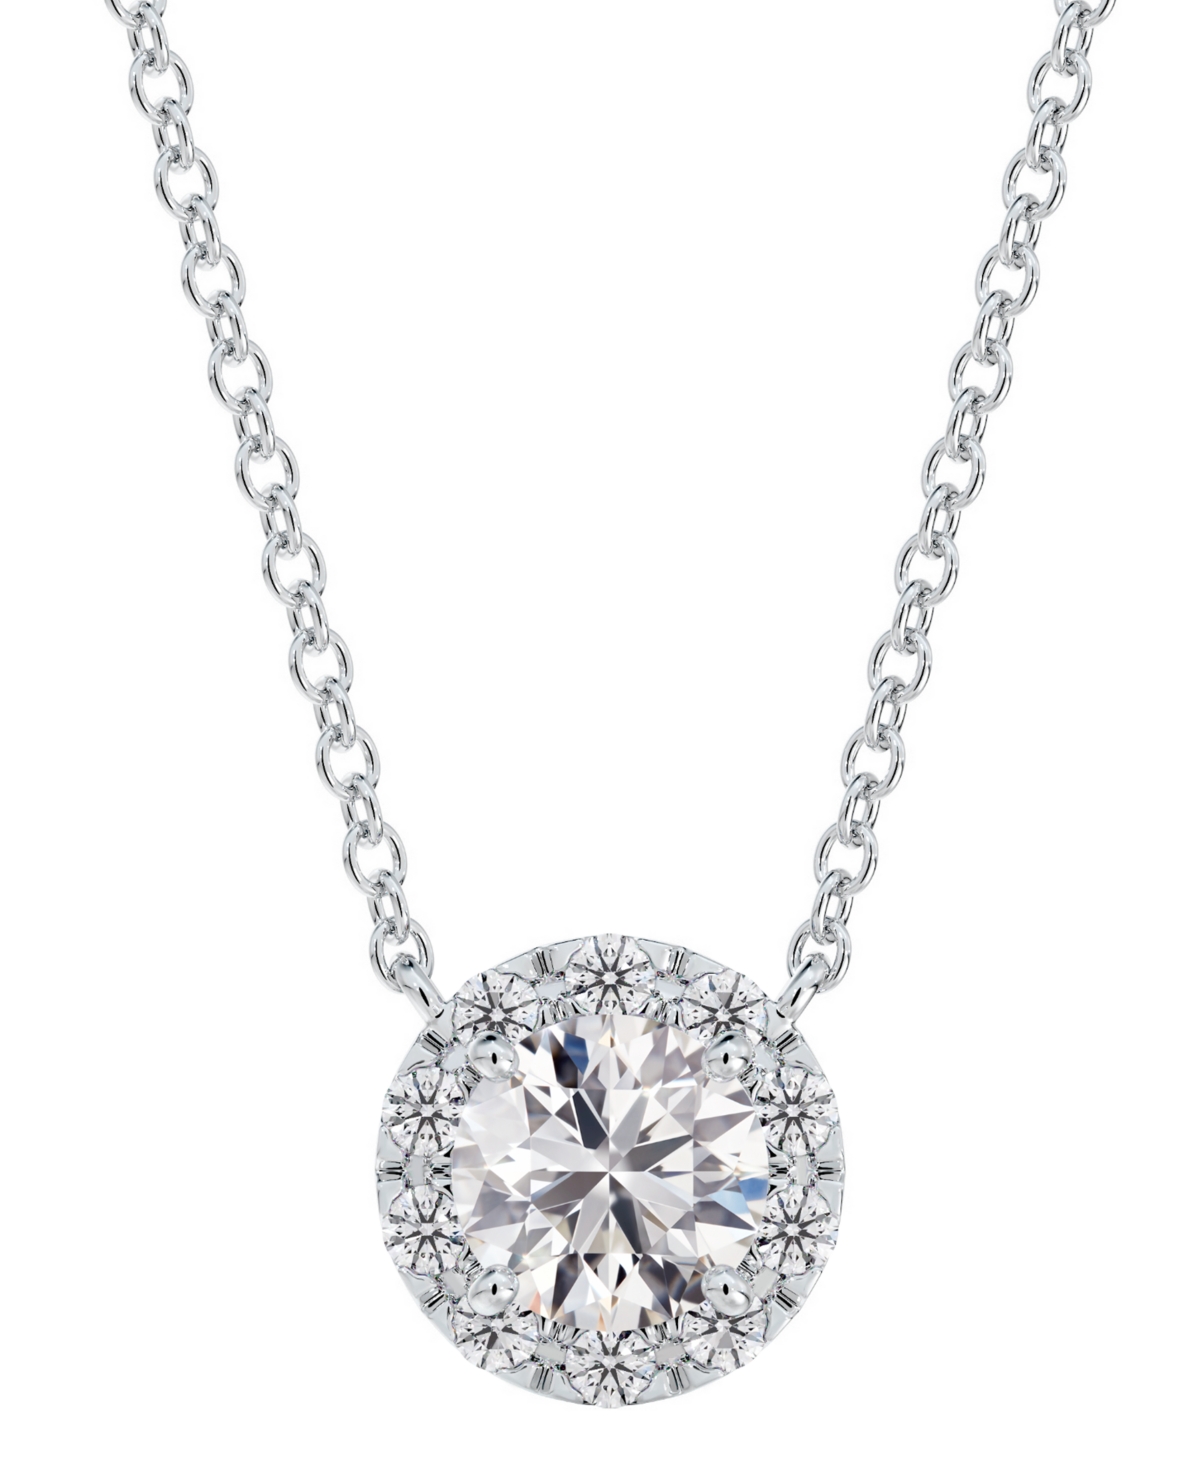 Portfolio by De Beers Forevermark Diamond Halo Pendant Necklace (3/4 ct. t.w.) in 14k White Gold, 16" + 2" extender - White Gold